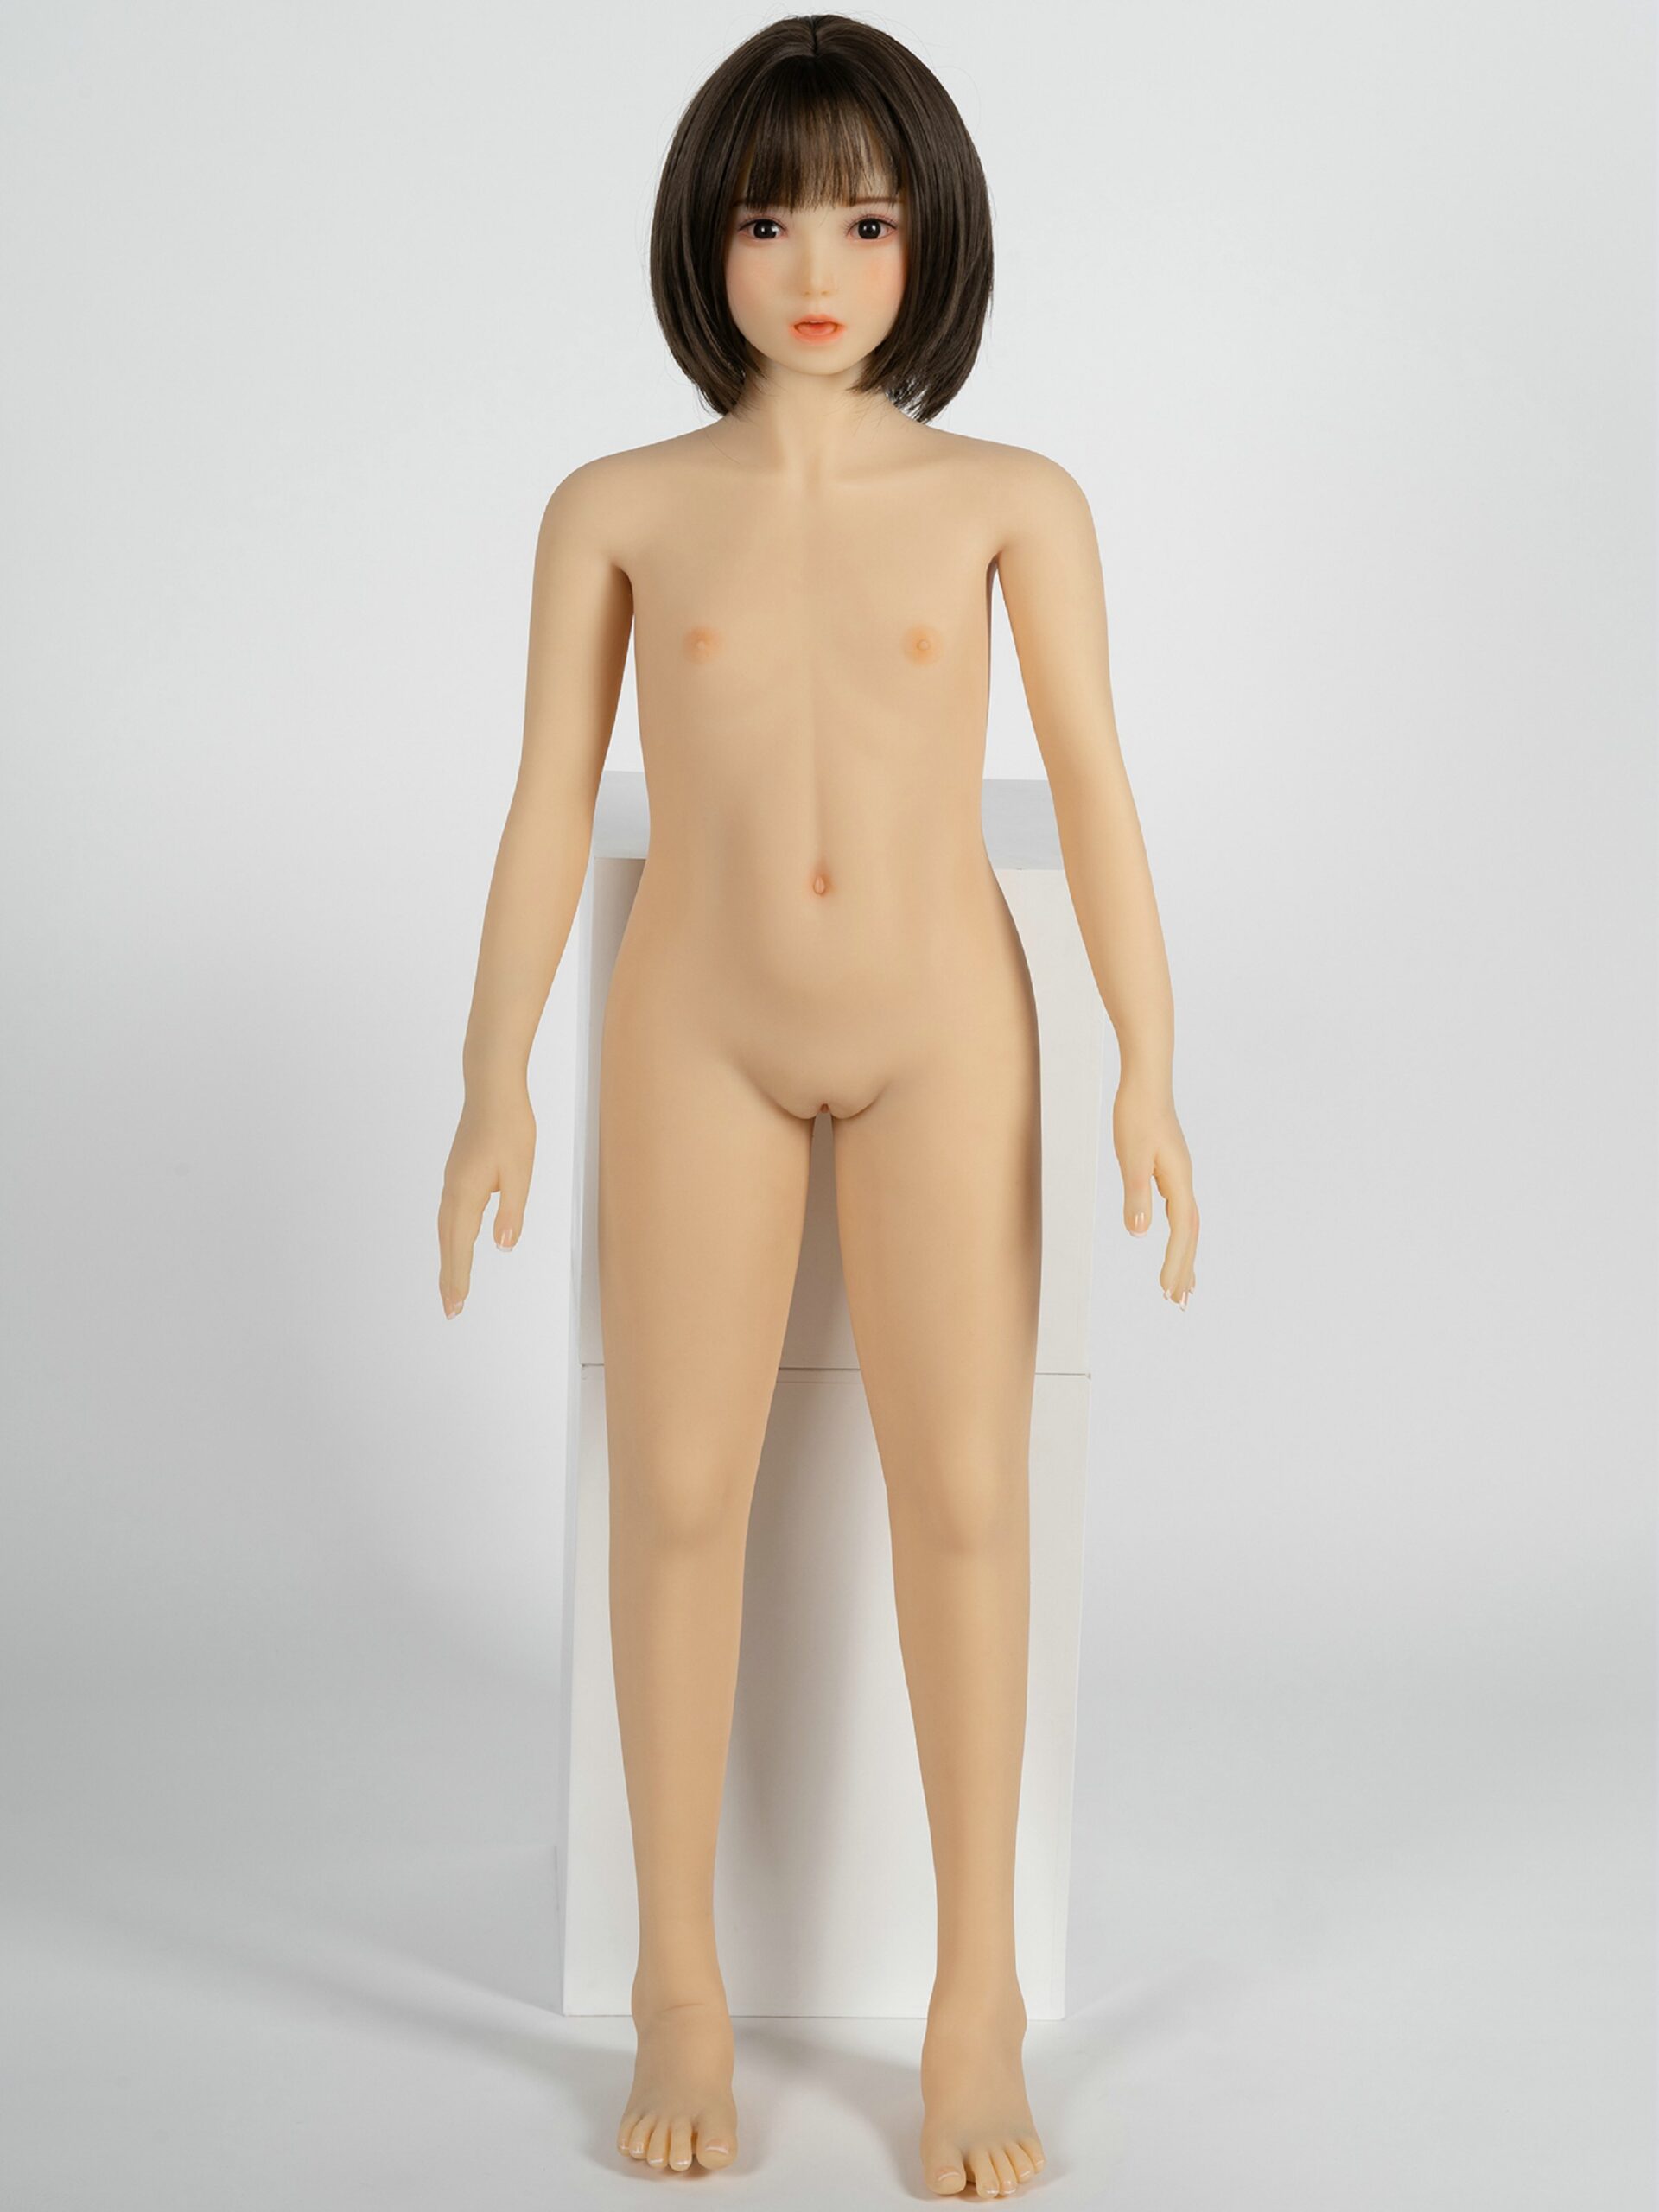 120cm young naked love doll